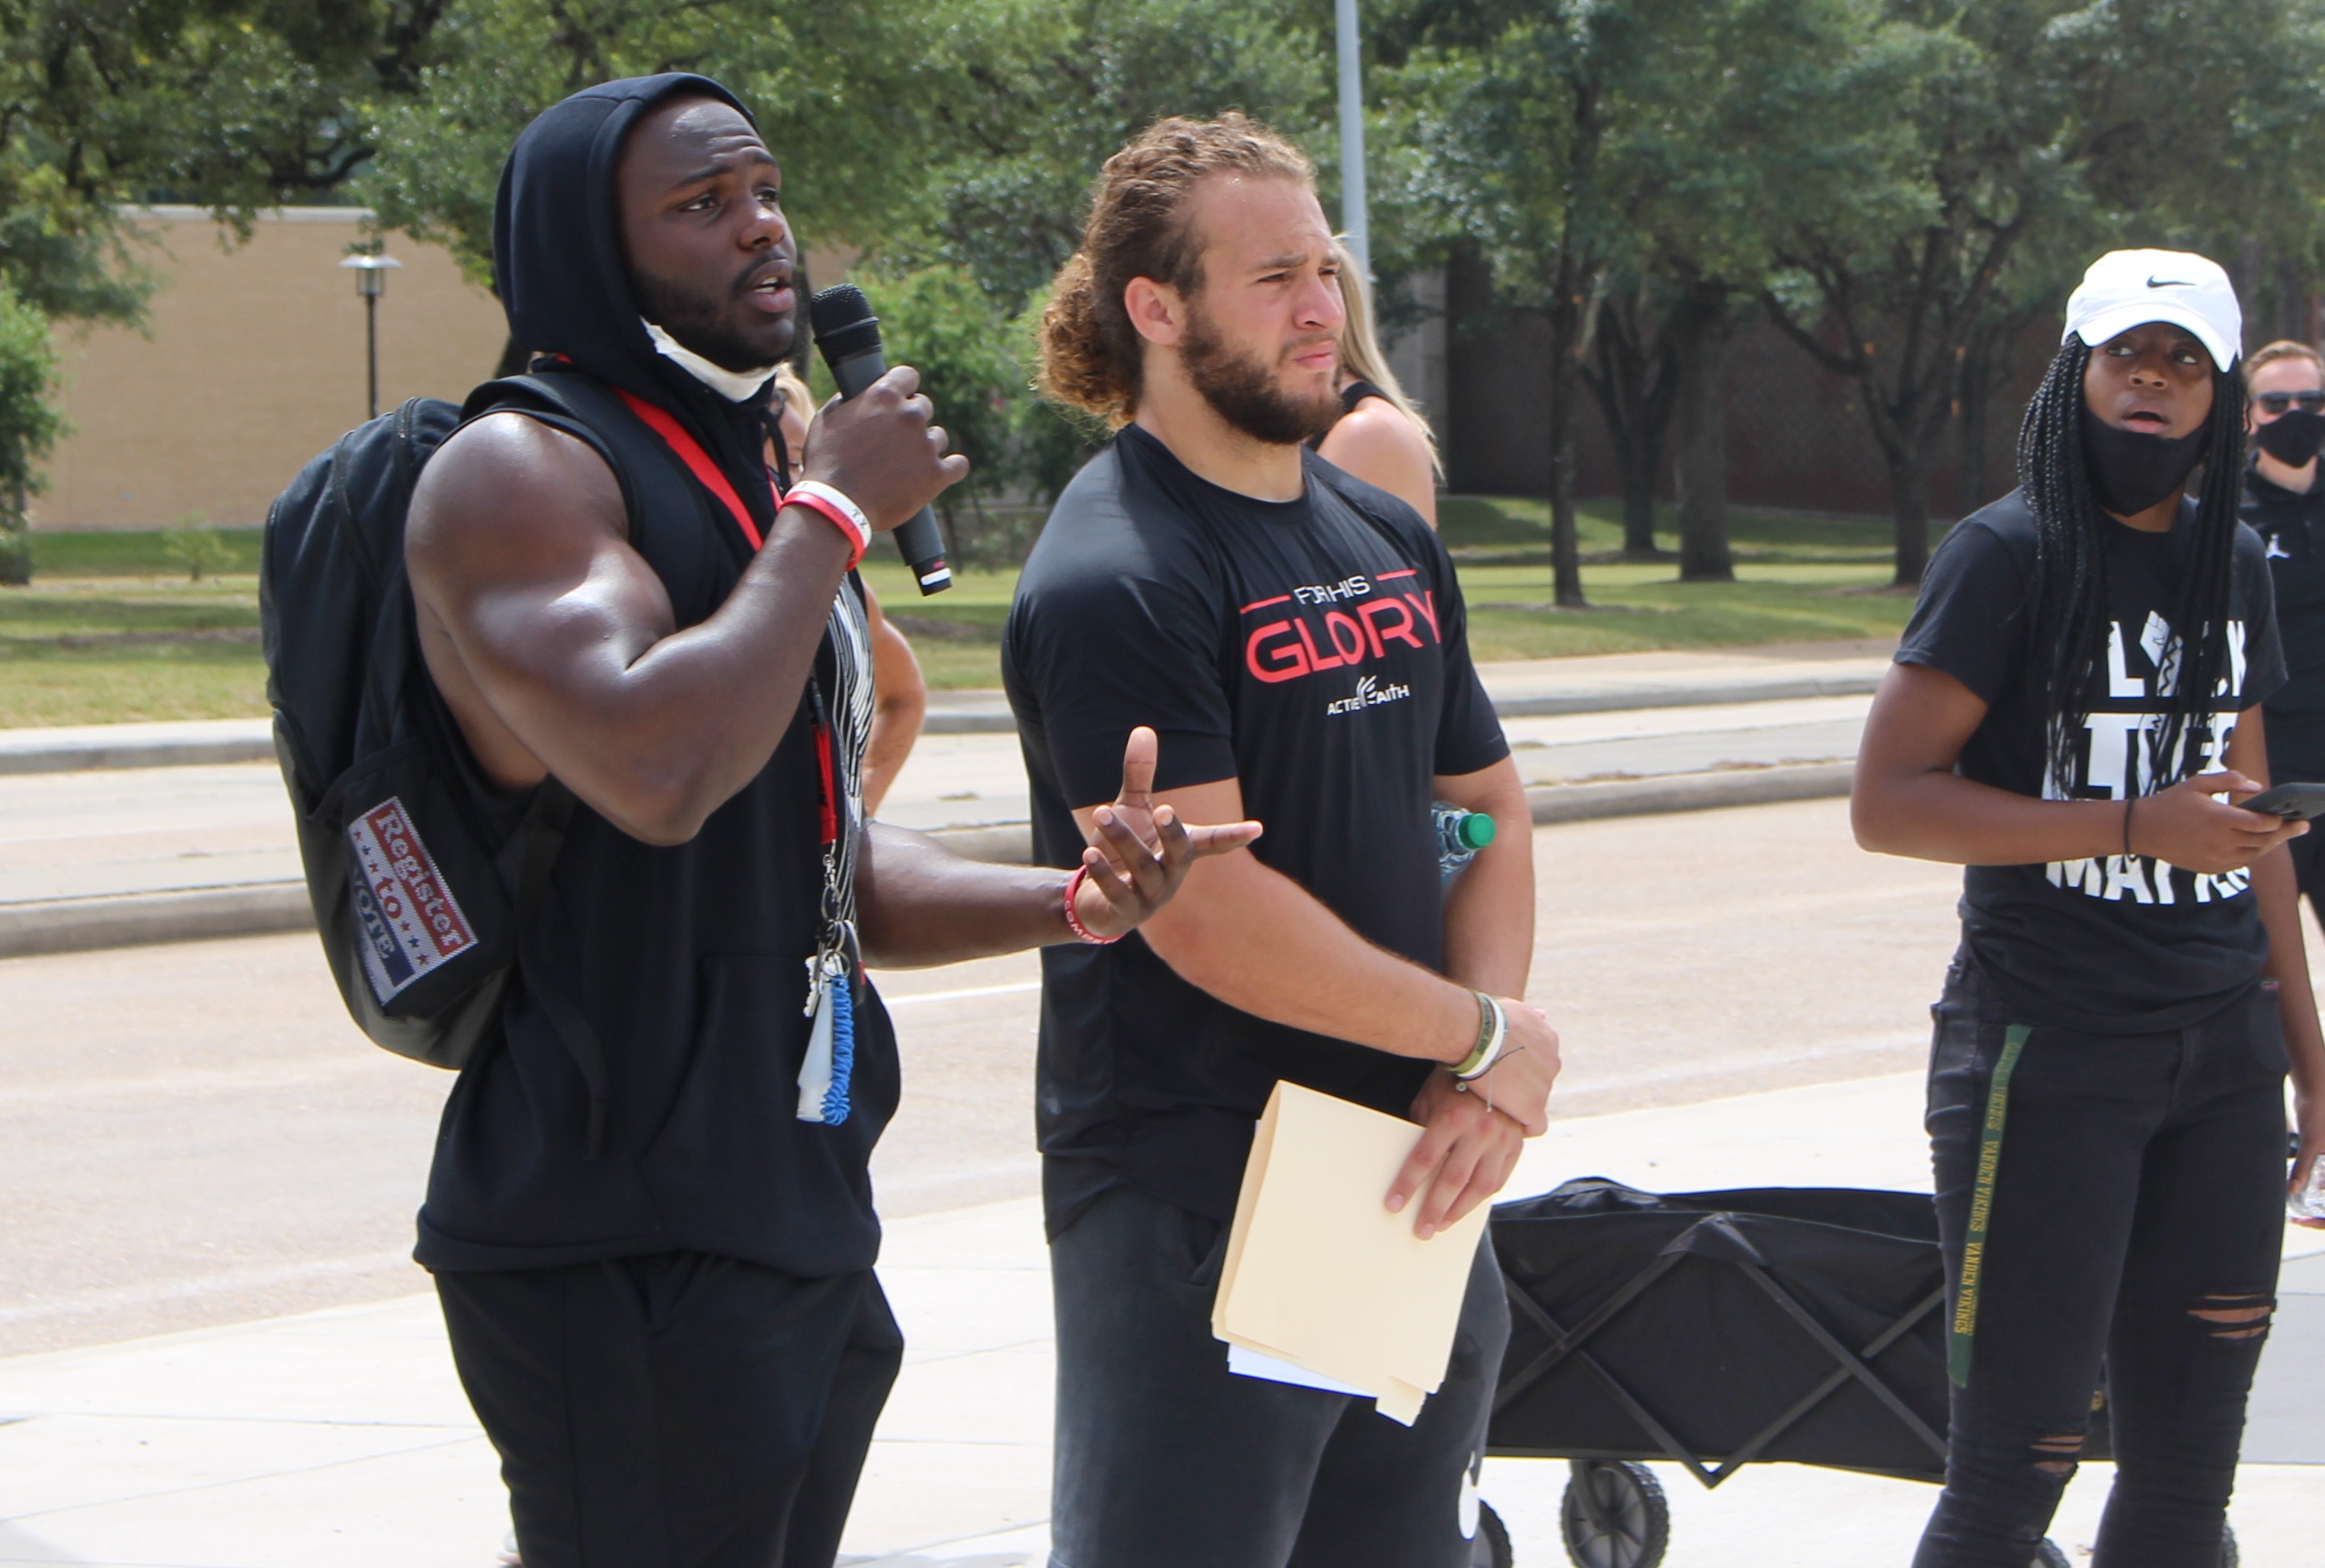 Senior linebacker Grant Stuard (middle) on why he has used his voice to advocate for equality: "I saw my team fighting against each other. So I took it upon myself to educate myself about everybody’s opinion, everybody’s beliefs and to understand that unity is the only way we can move forward." | Donna Keeya/The Cougar